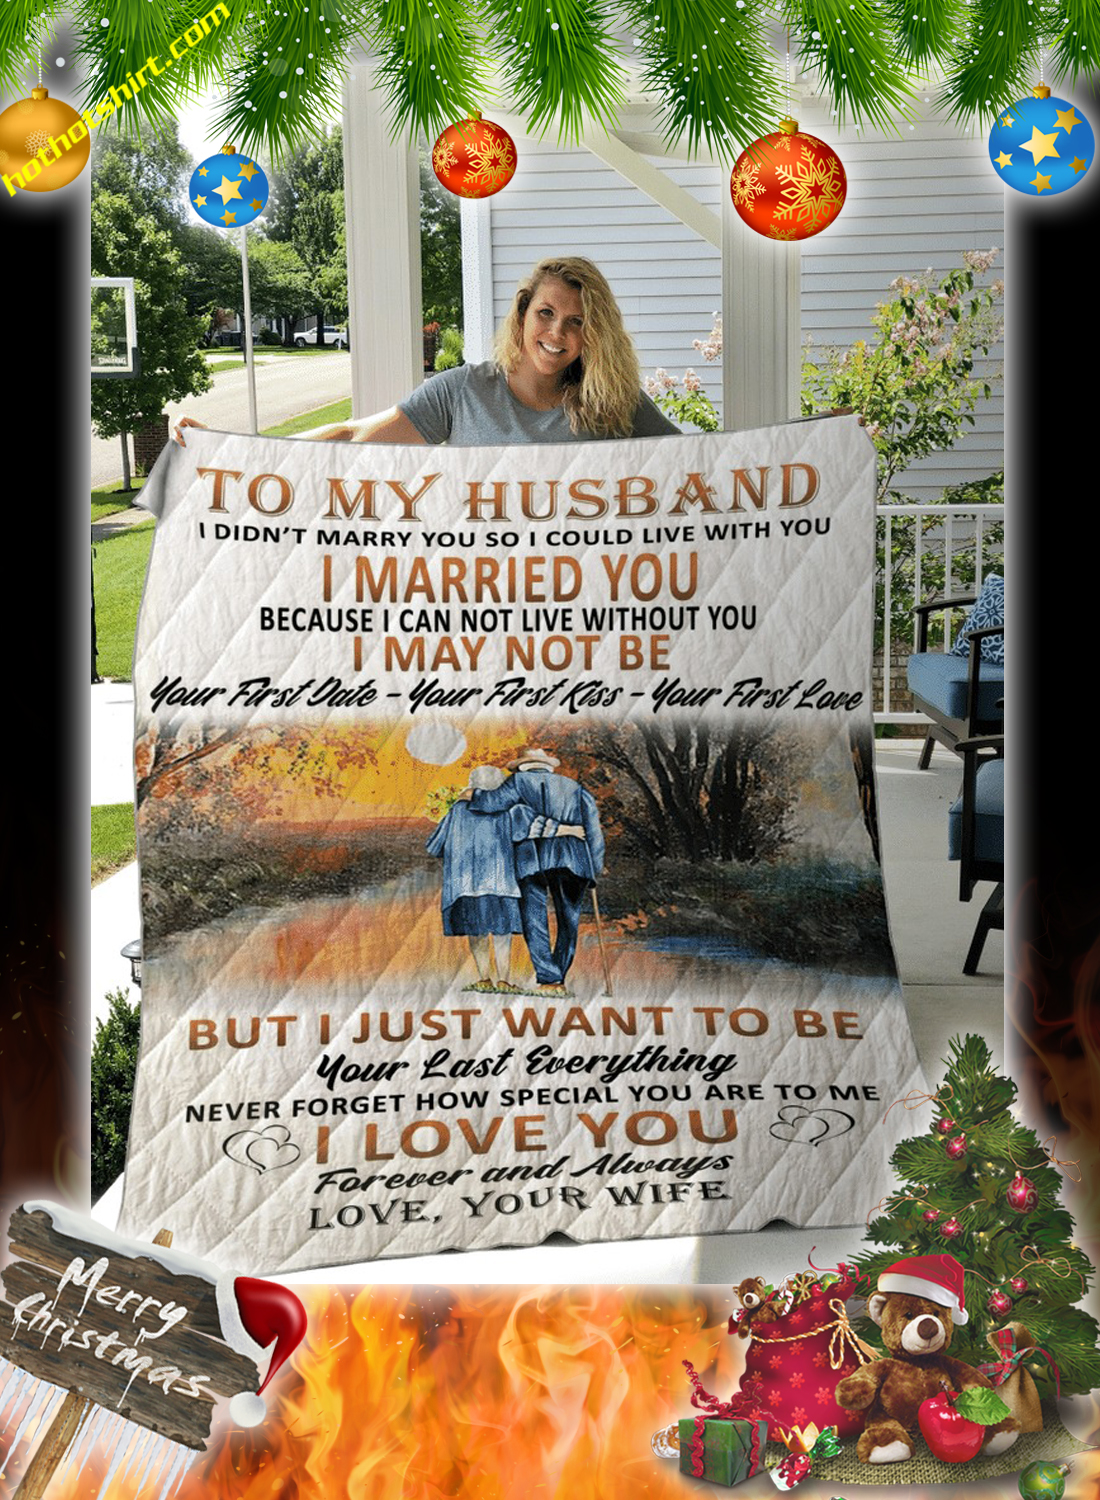 To my husband i didn’t marry you so i could live with you your wife quilt – Hothot 111120